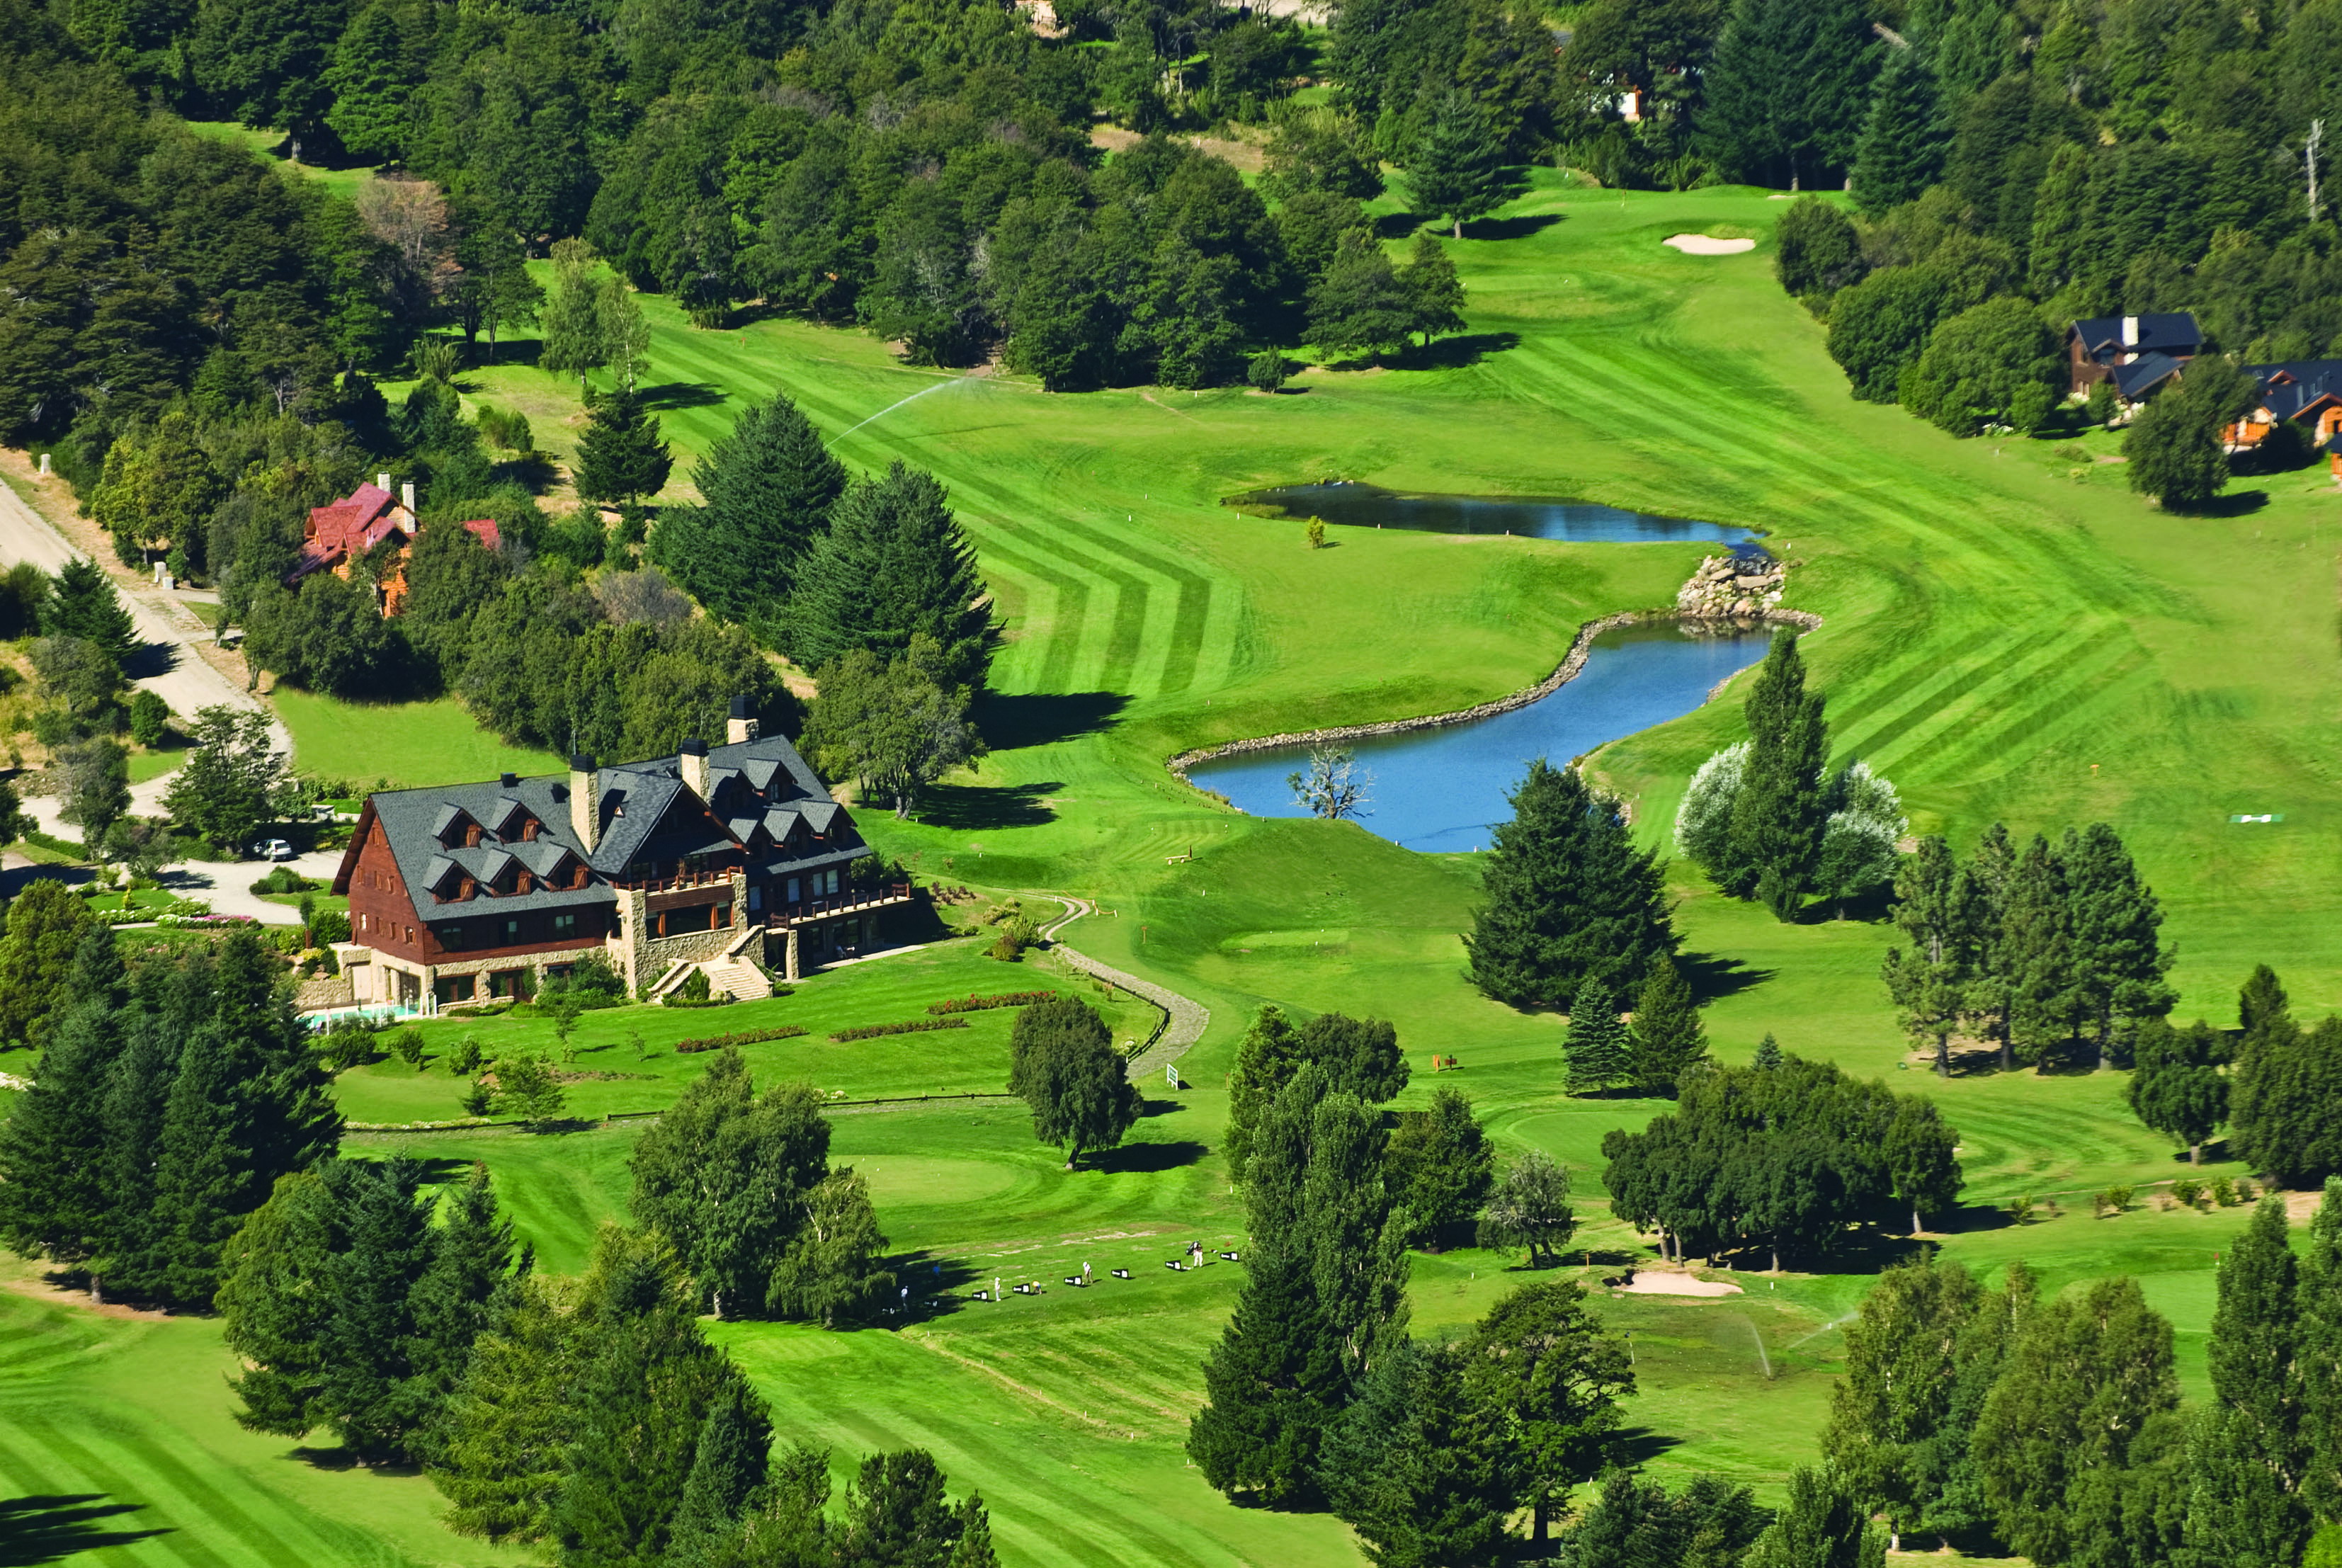 Five golf courses with a difference